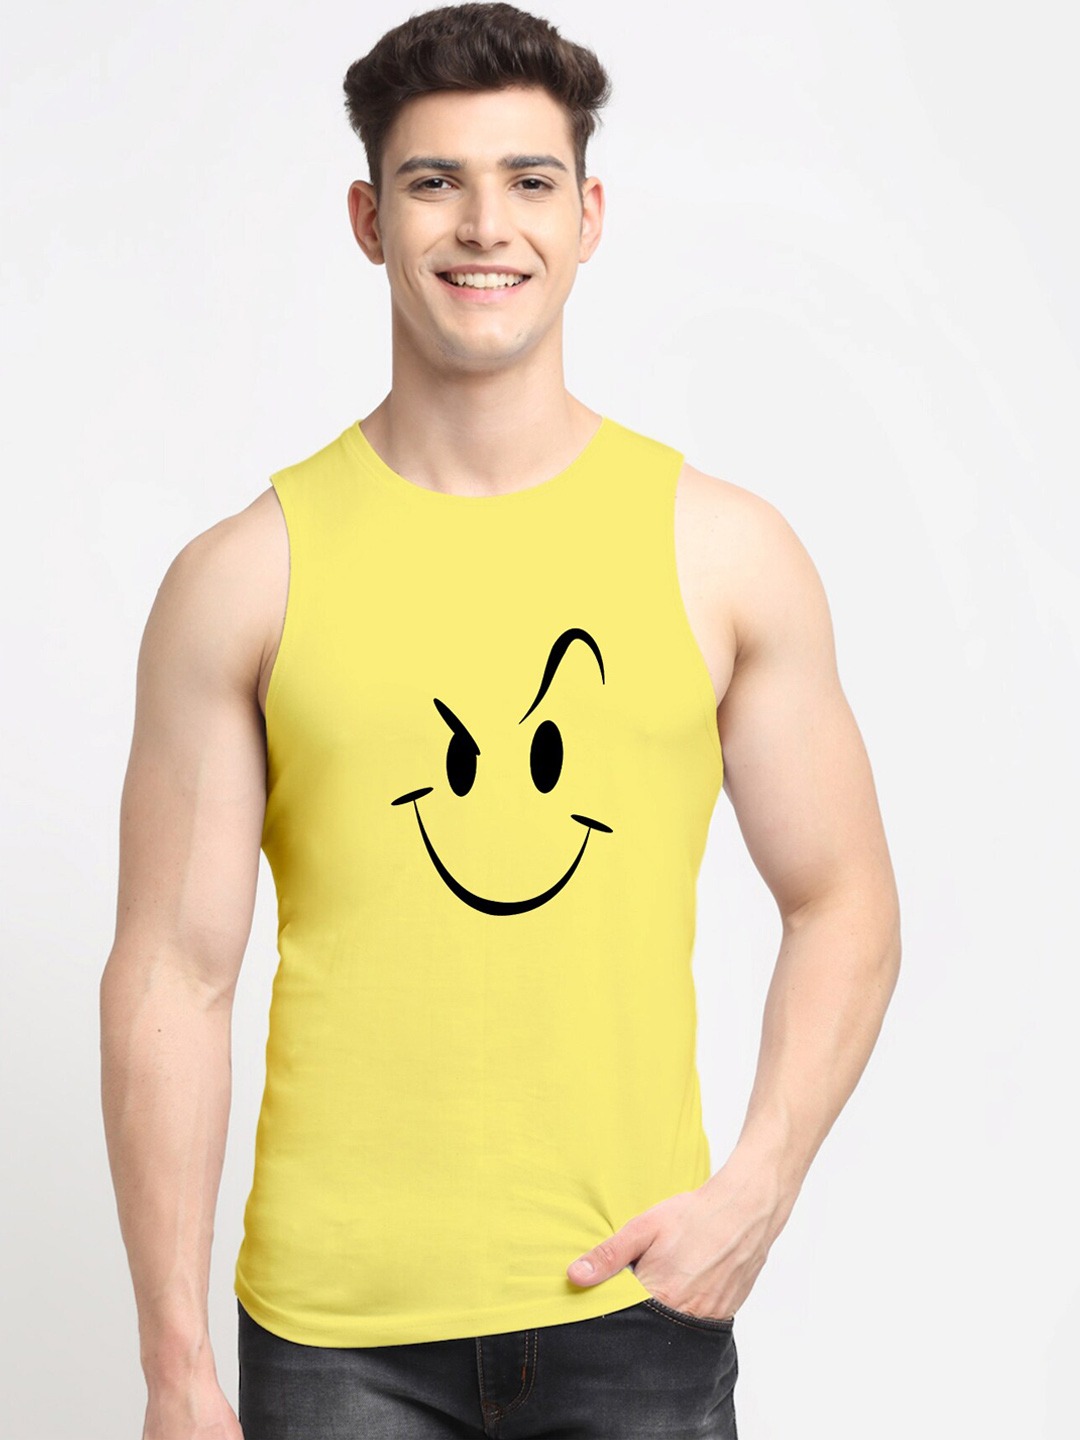 Clothing Innerwear Vests | Friskers Men Yellow Printed Pure Cotton Innerwear Vests - HJ83671